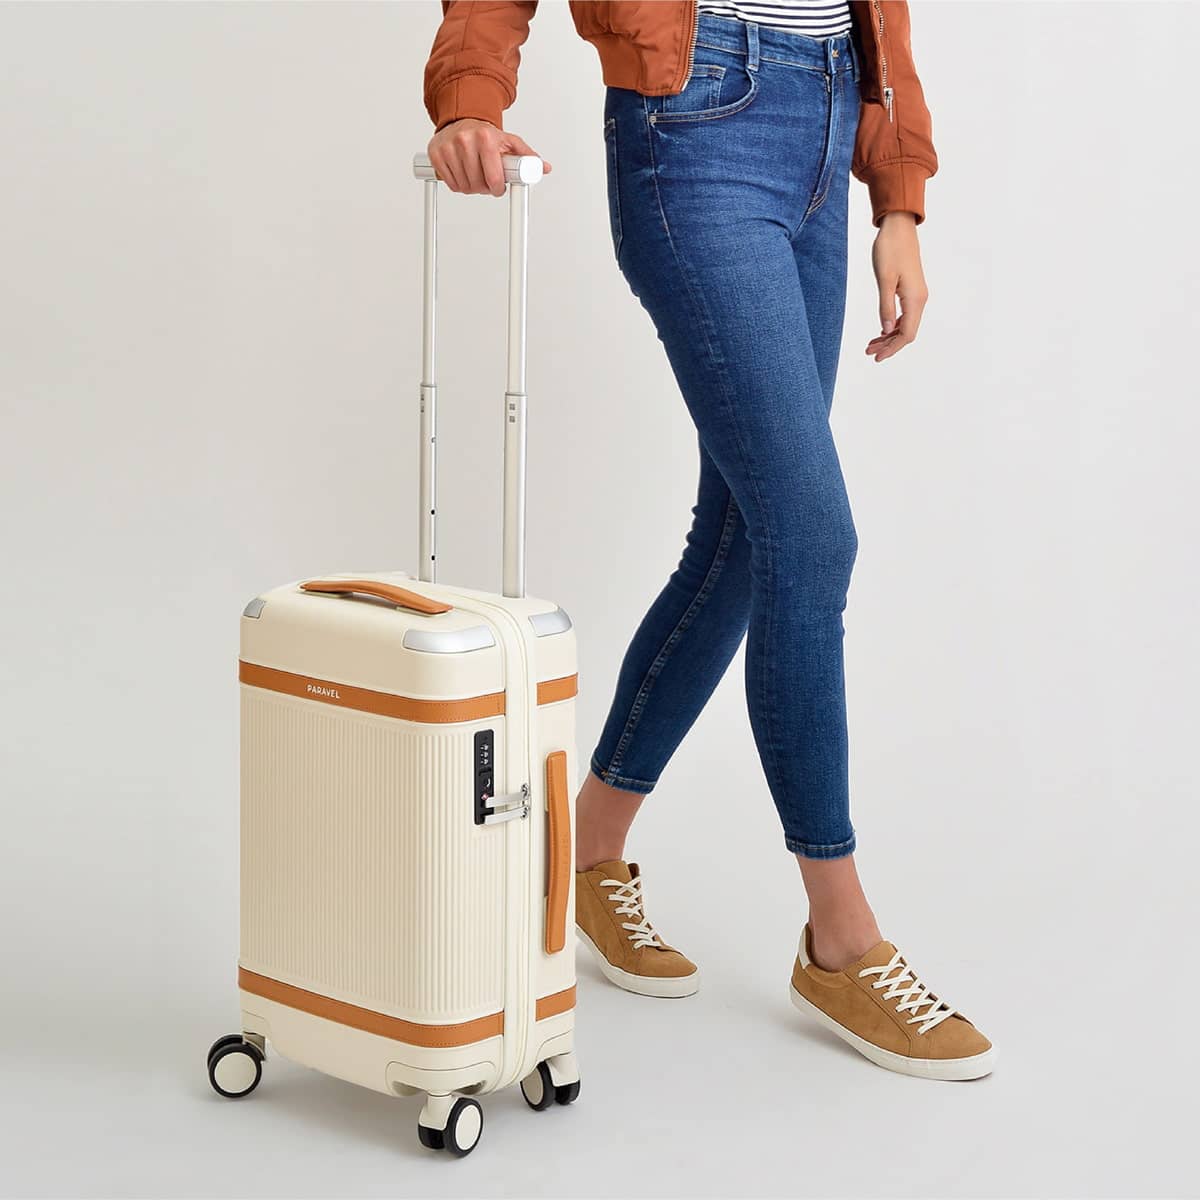 Most Stylish Carry-On Suitcase